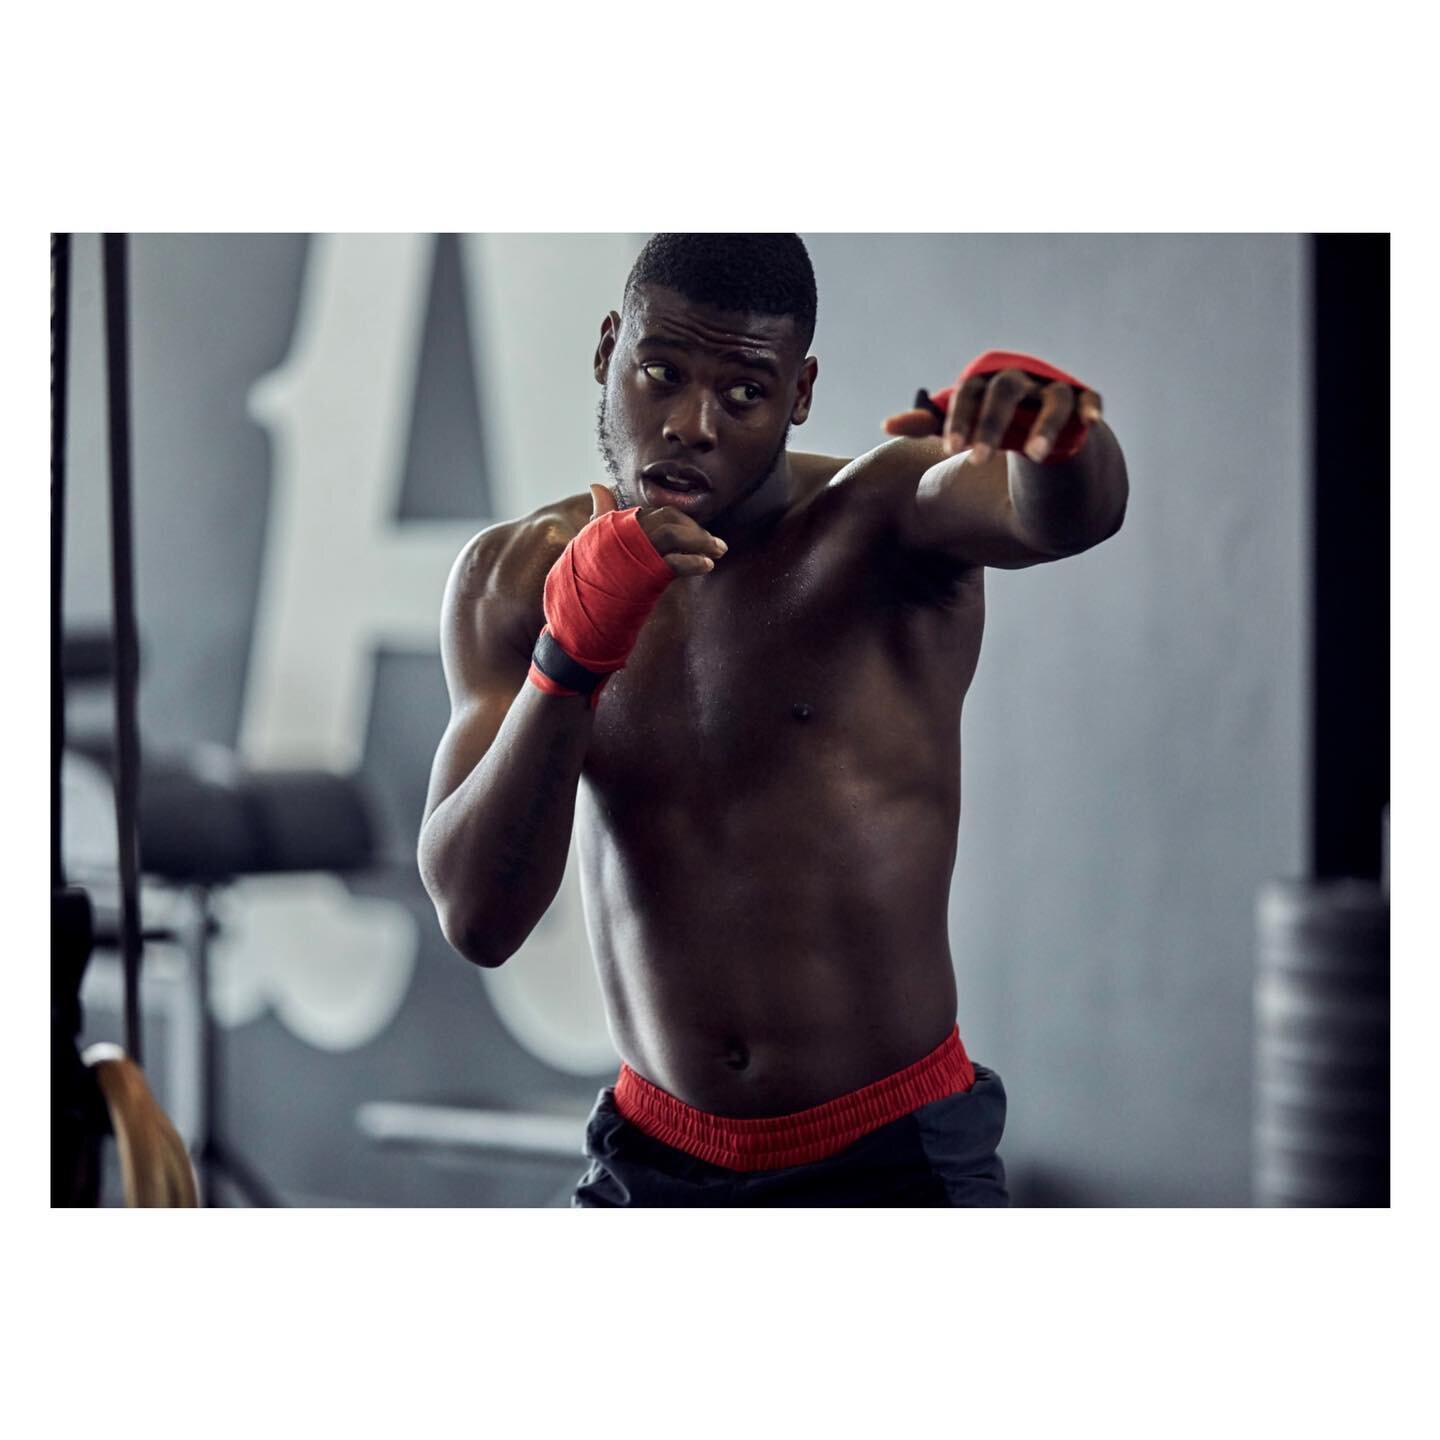 All the best tonight @chamberlain_ 👊 for tonight&rsquo;s fight. Live in the UK on channel 5 at 10 pm fight fans ! Photo from a shoot we did together for ESC &hellip;.
.
.
.
.
.
#fightnight #boxing #boxer #fight #box #fitness #champ #chanel5 #fightti